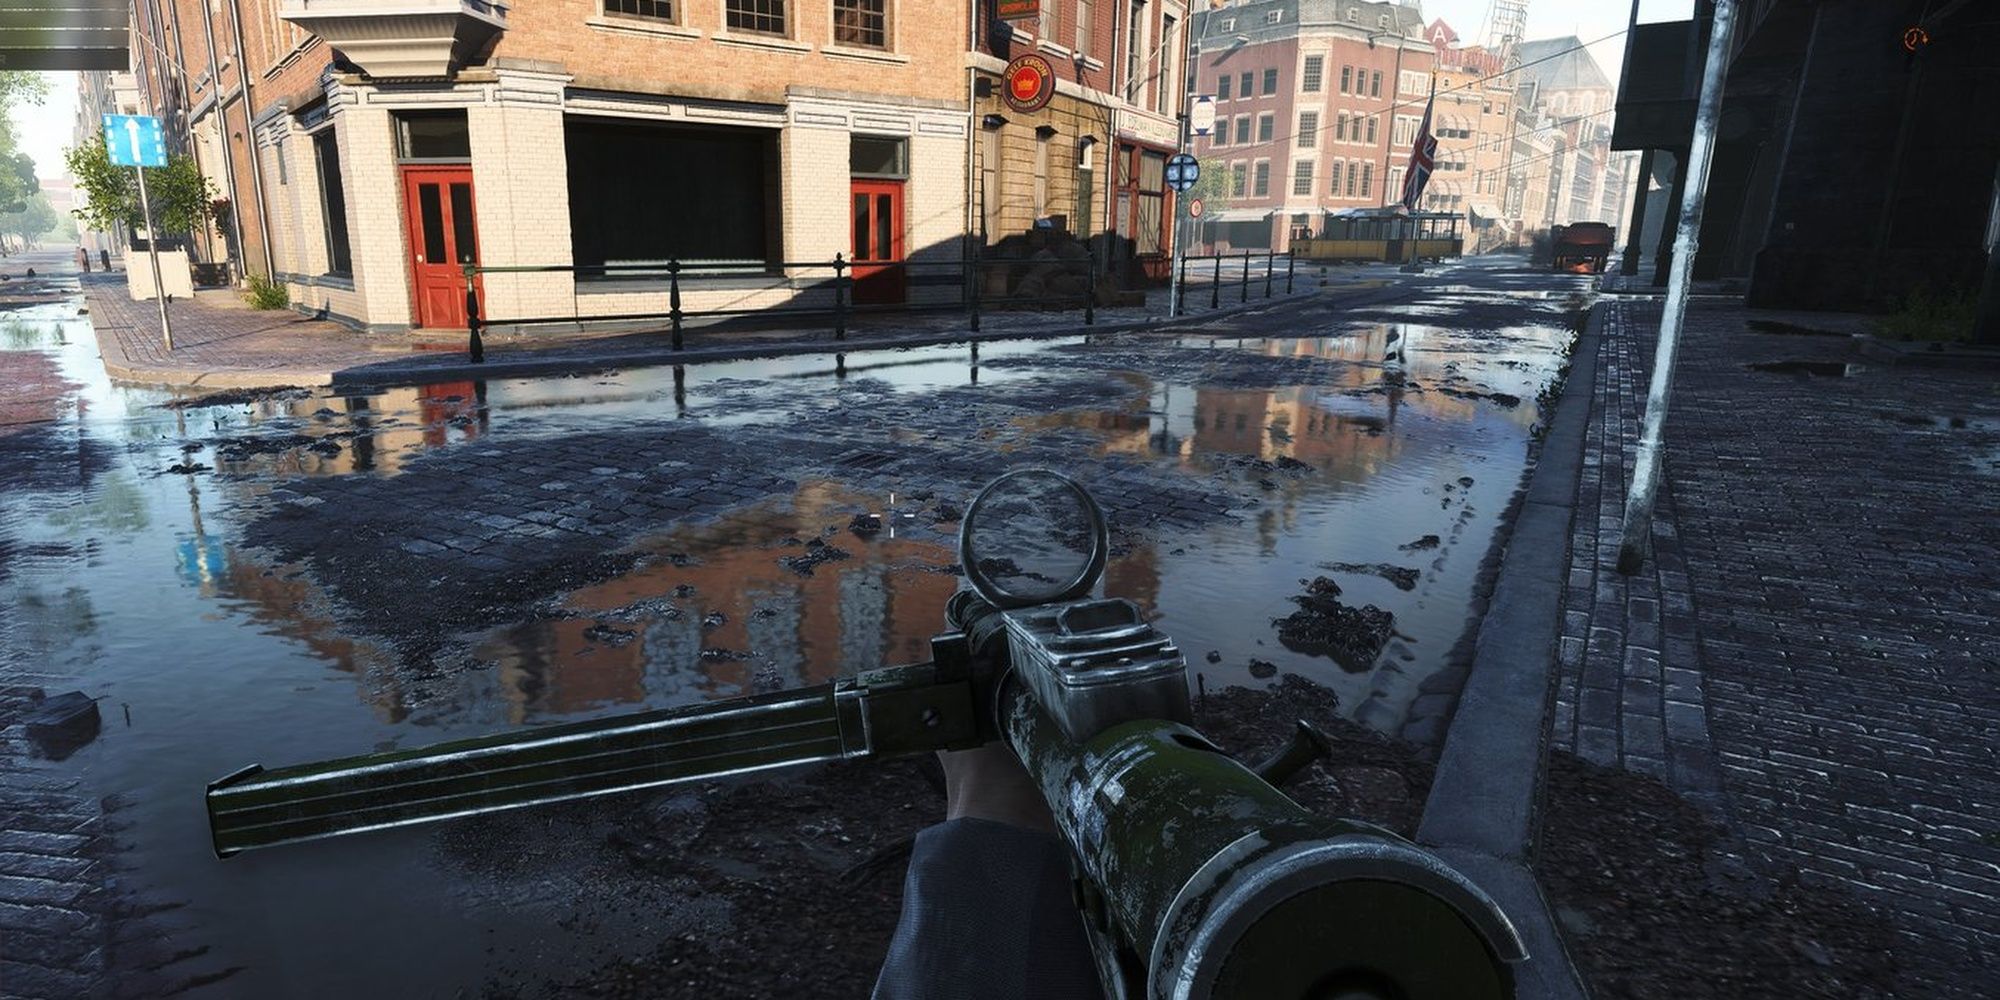 Battlefield V: The War Torn Streets Of Multiplayer With RTX Enabled